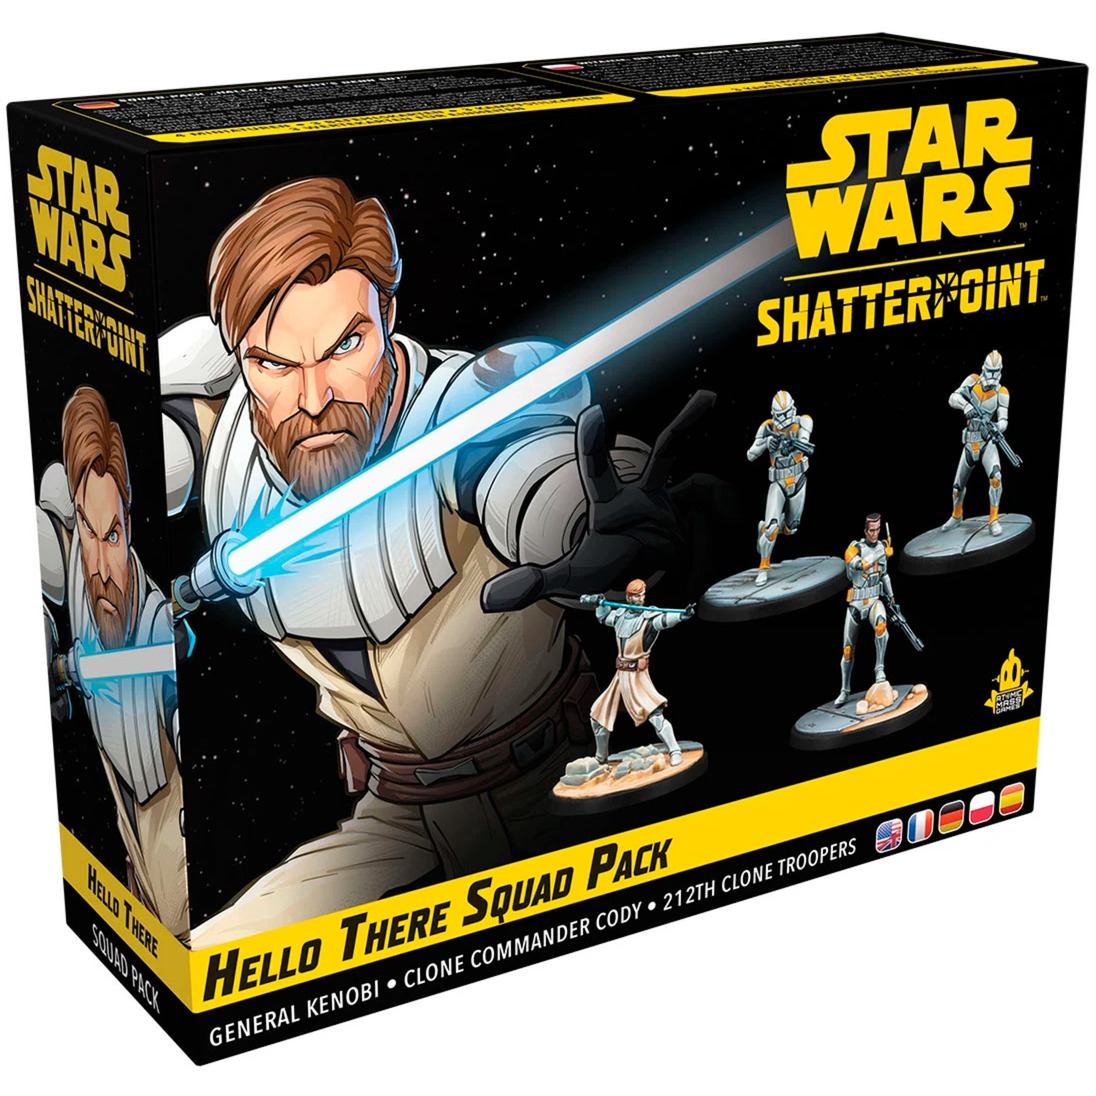 Star Wars: Shatterpoint - Hello There Squad Pack, Tabletop von Asmodee